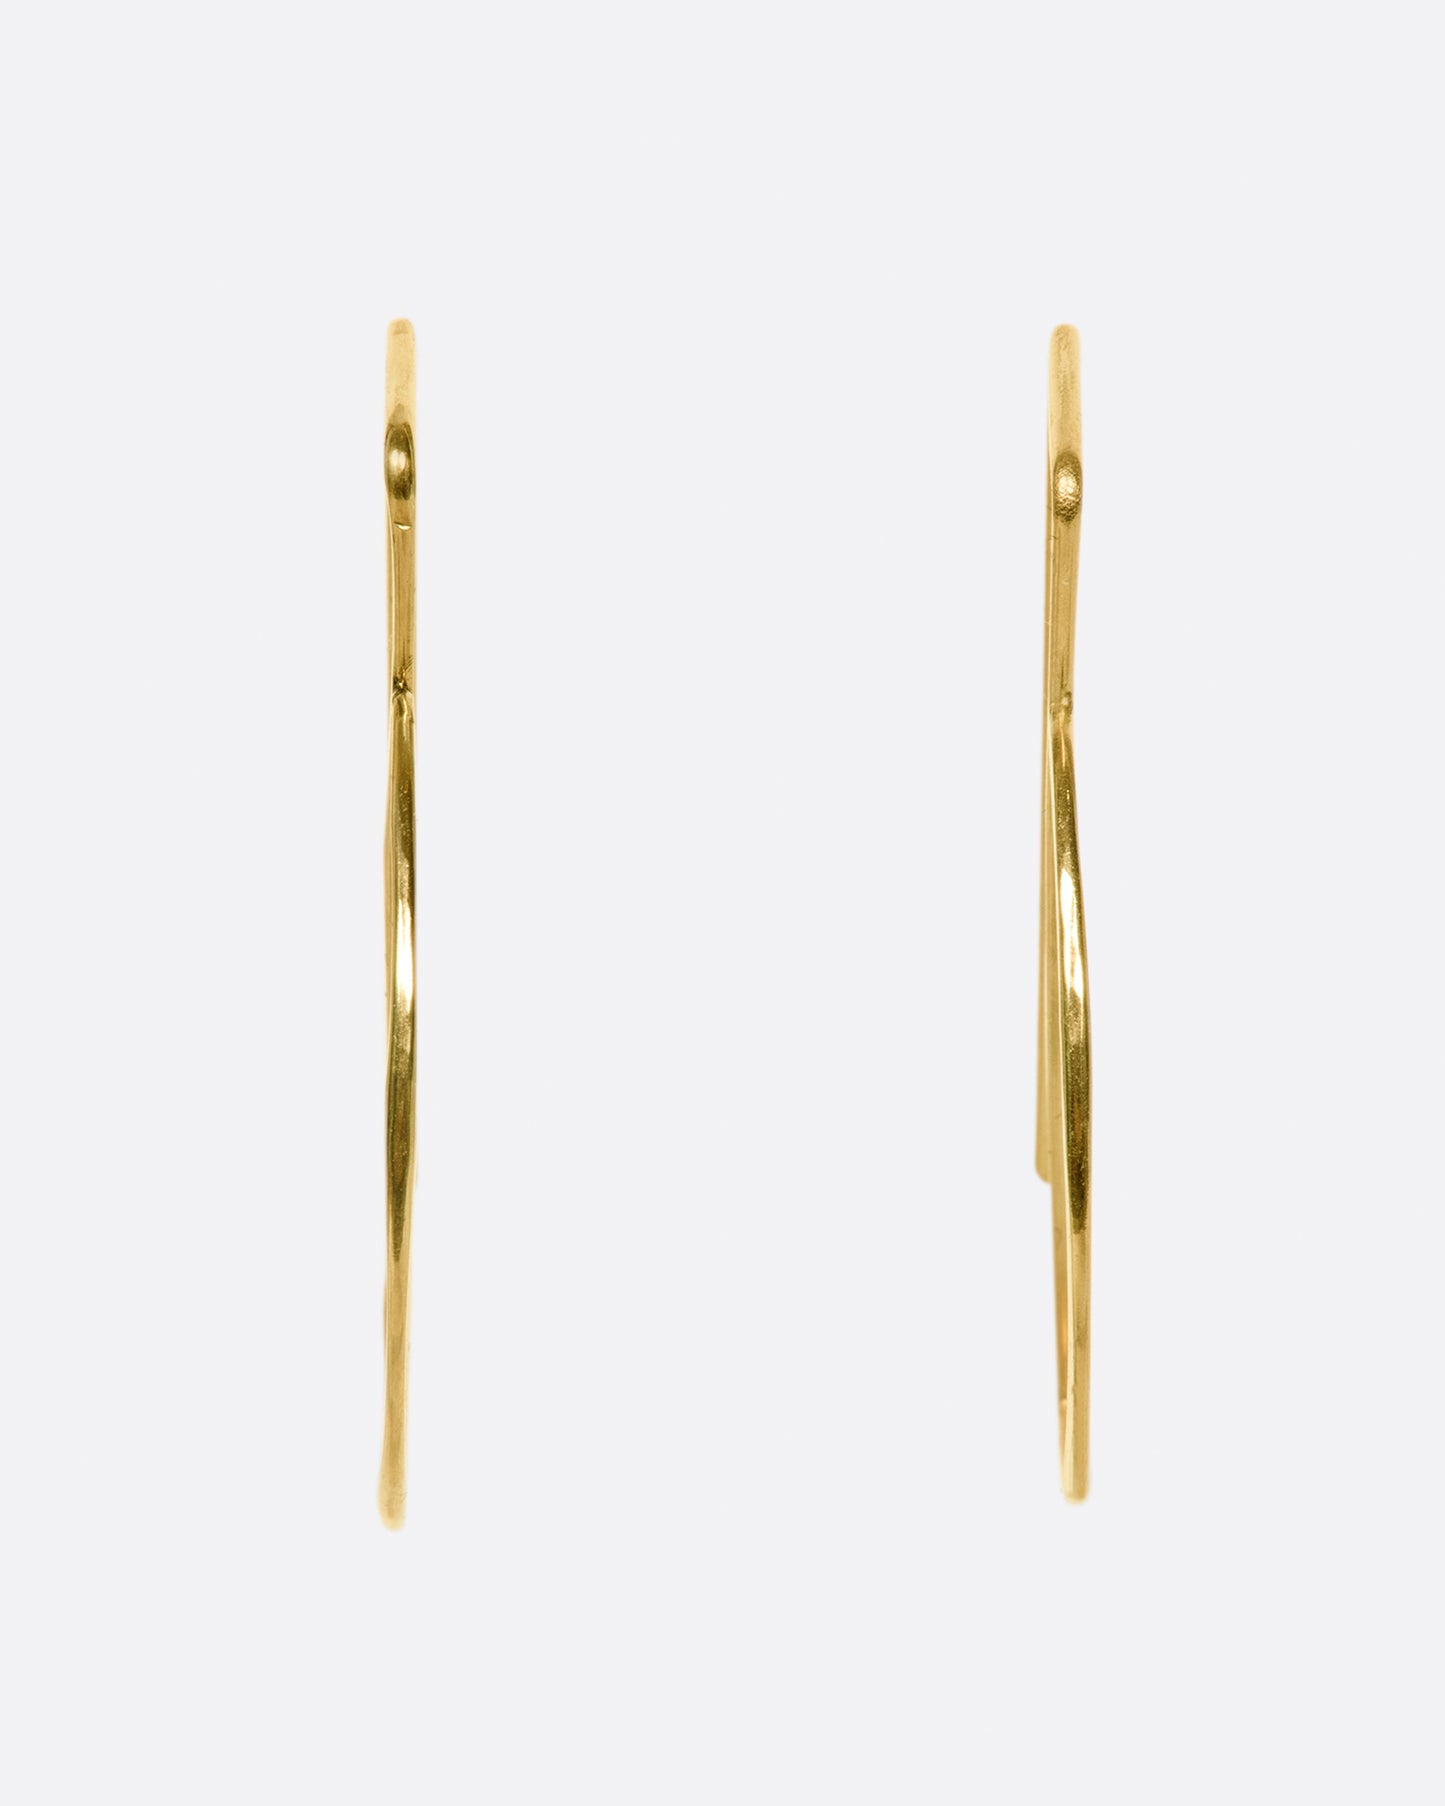 These hammered gold earrings thread through the ear so that the straight bar sits comfortably behind your lobe and the curve shows in front.